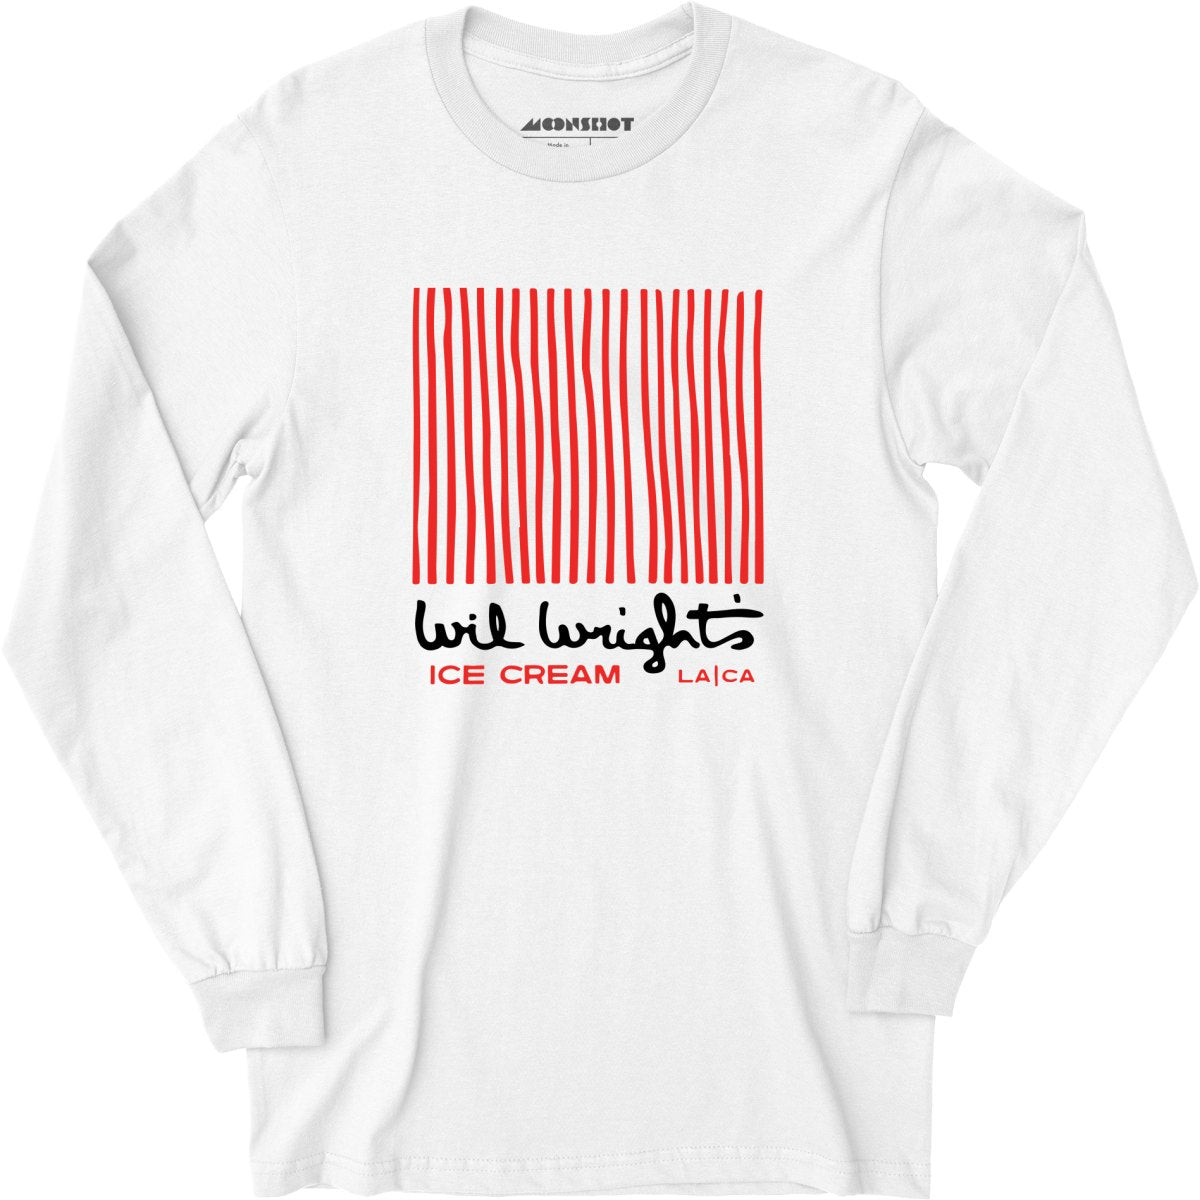 Wil Wright's Ice Cream - Los Angeles, CA - Vintage Ice Cream Parlor - Long Sleeve T-Shirt